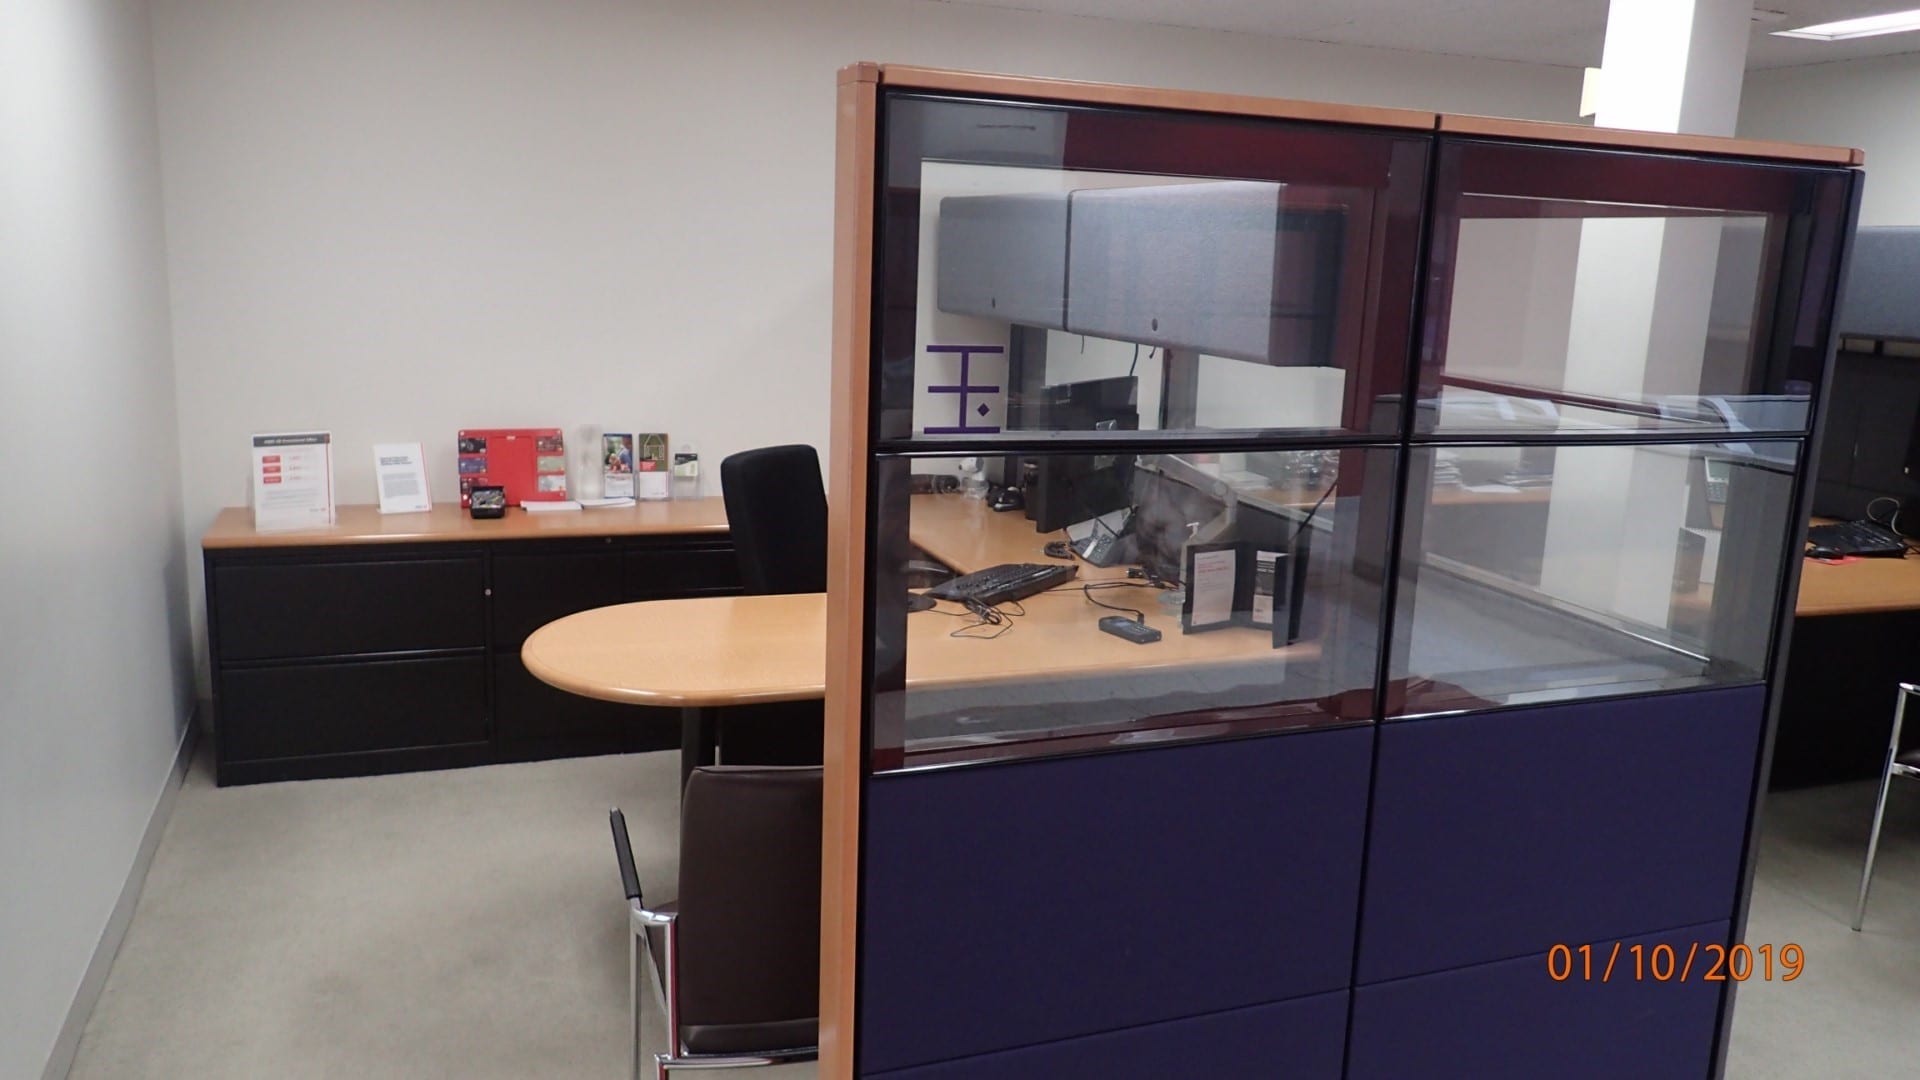 Used Office Furniture Near Me | used Office Furniture ...